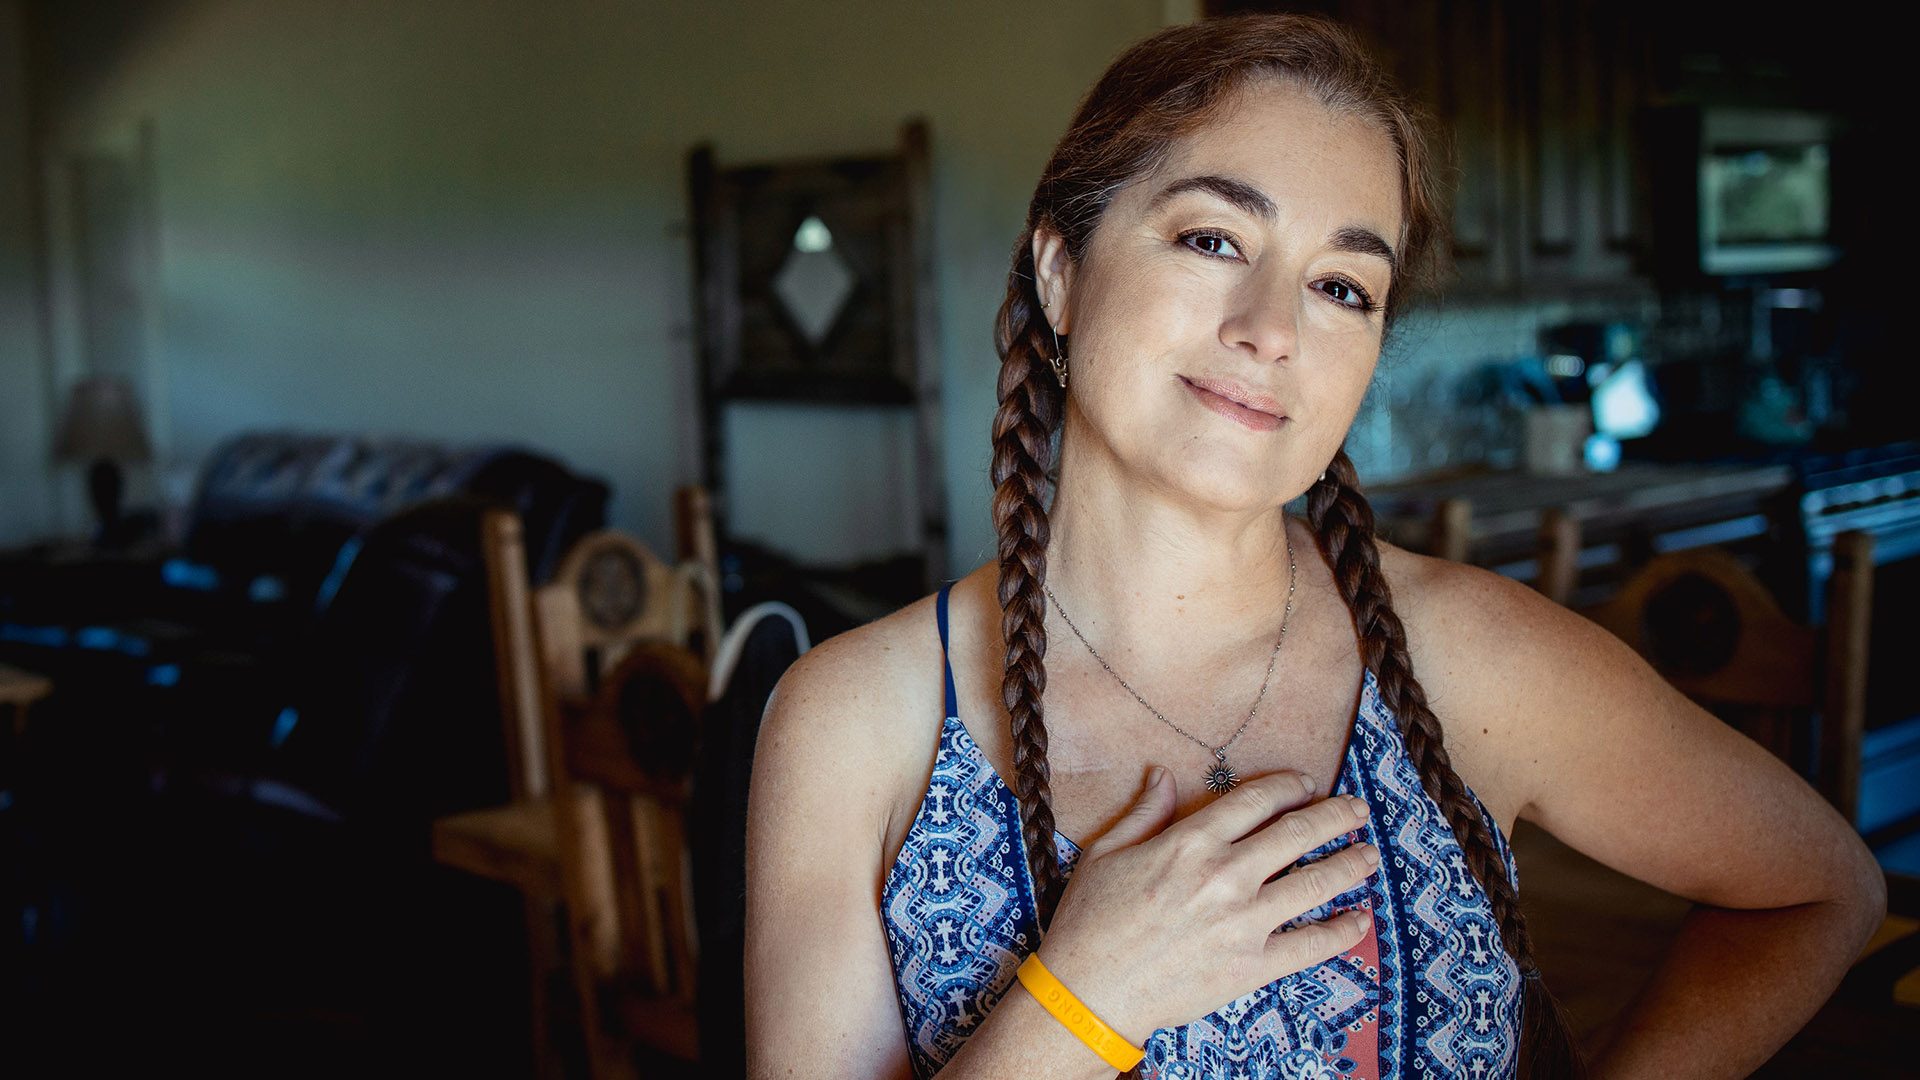 A middle aged woman with braids poses with Livestrong wristband